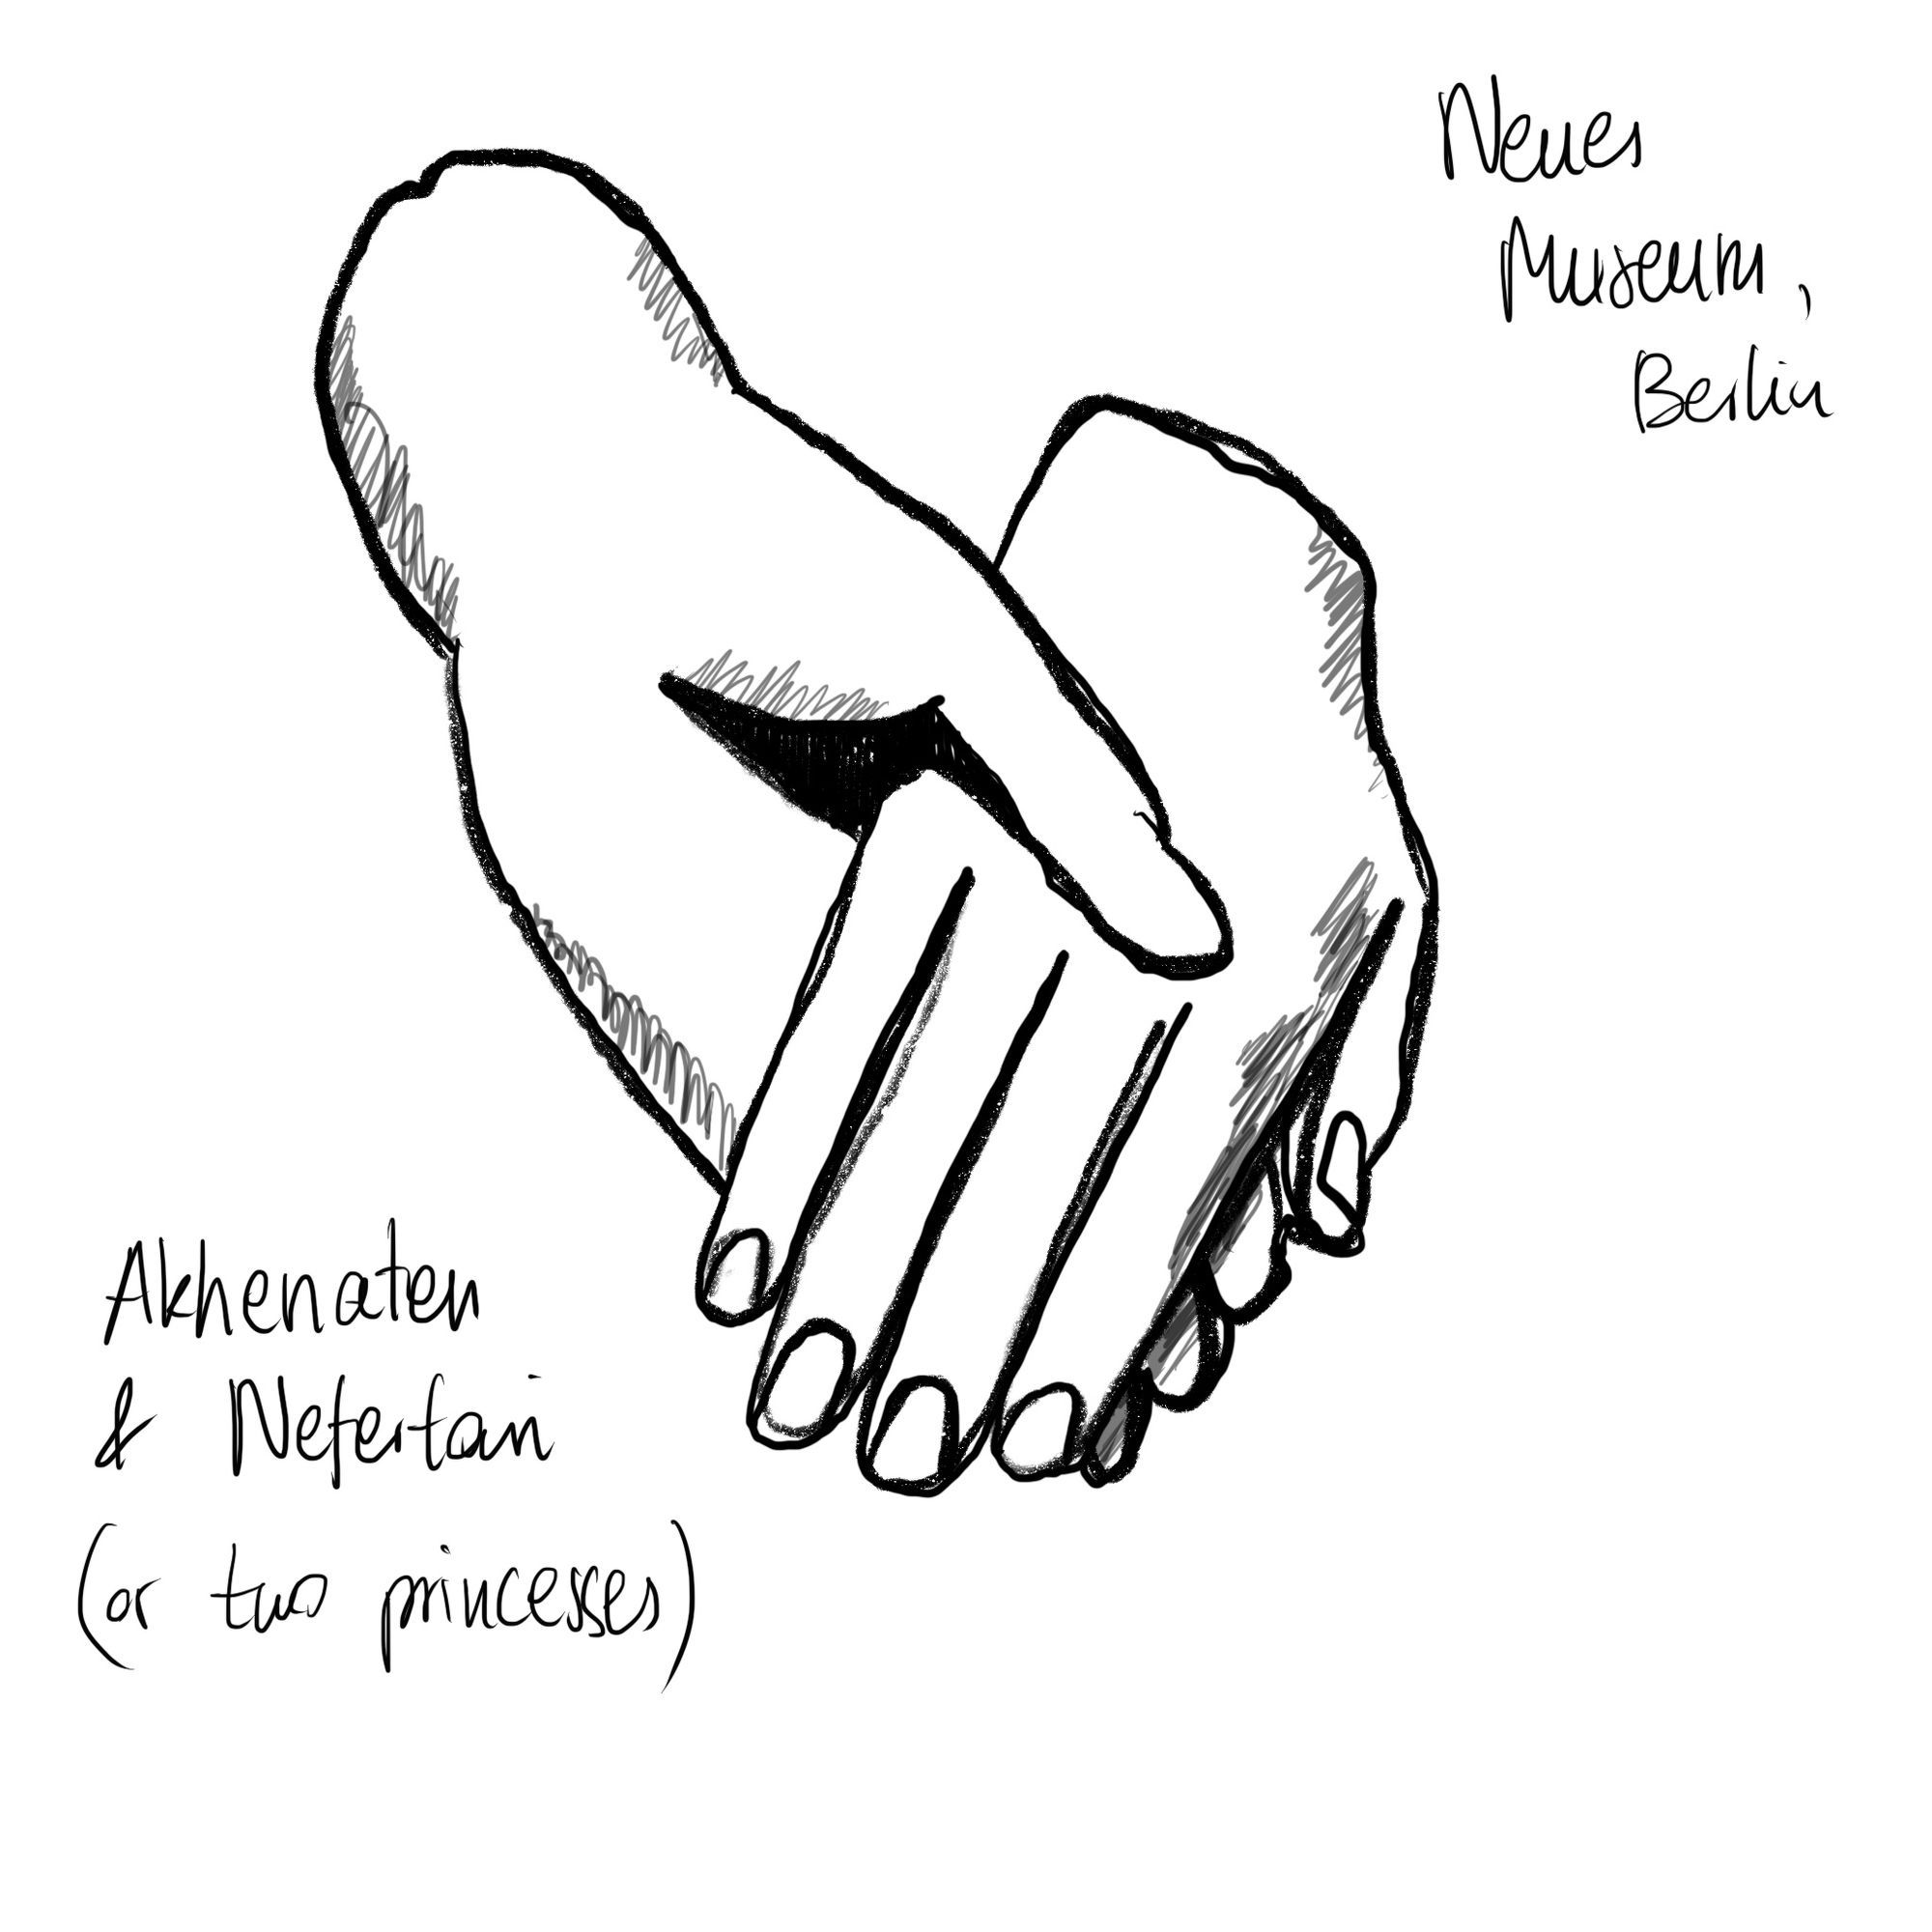 A drawing of the Pair of hands from a group statue of Akhenaten and Nefertari or two princesses